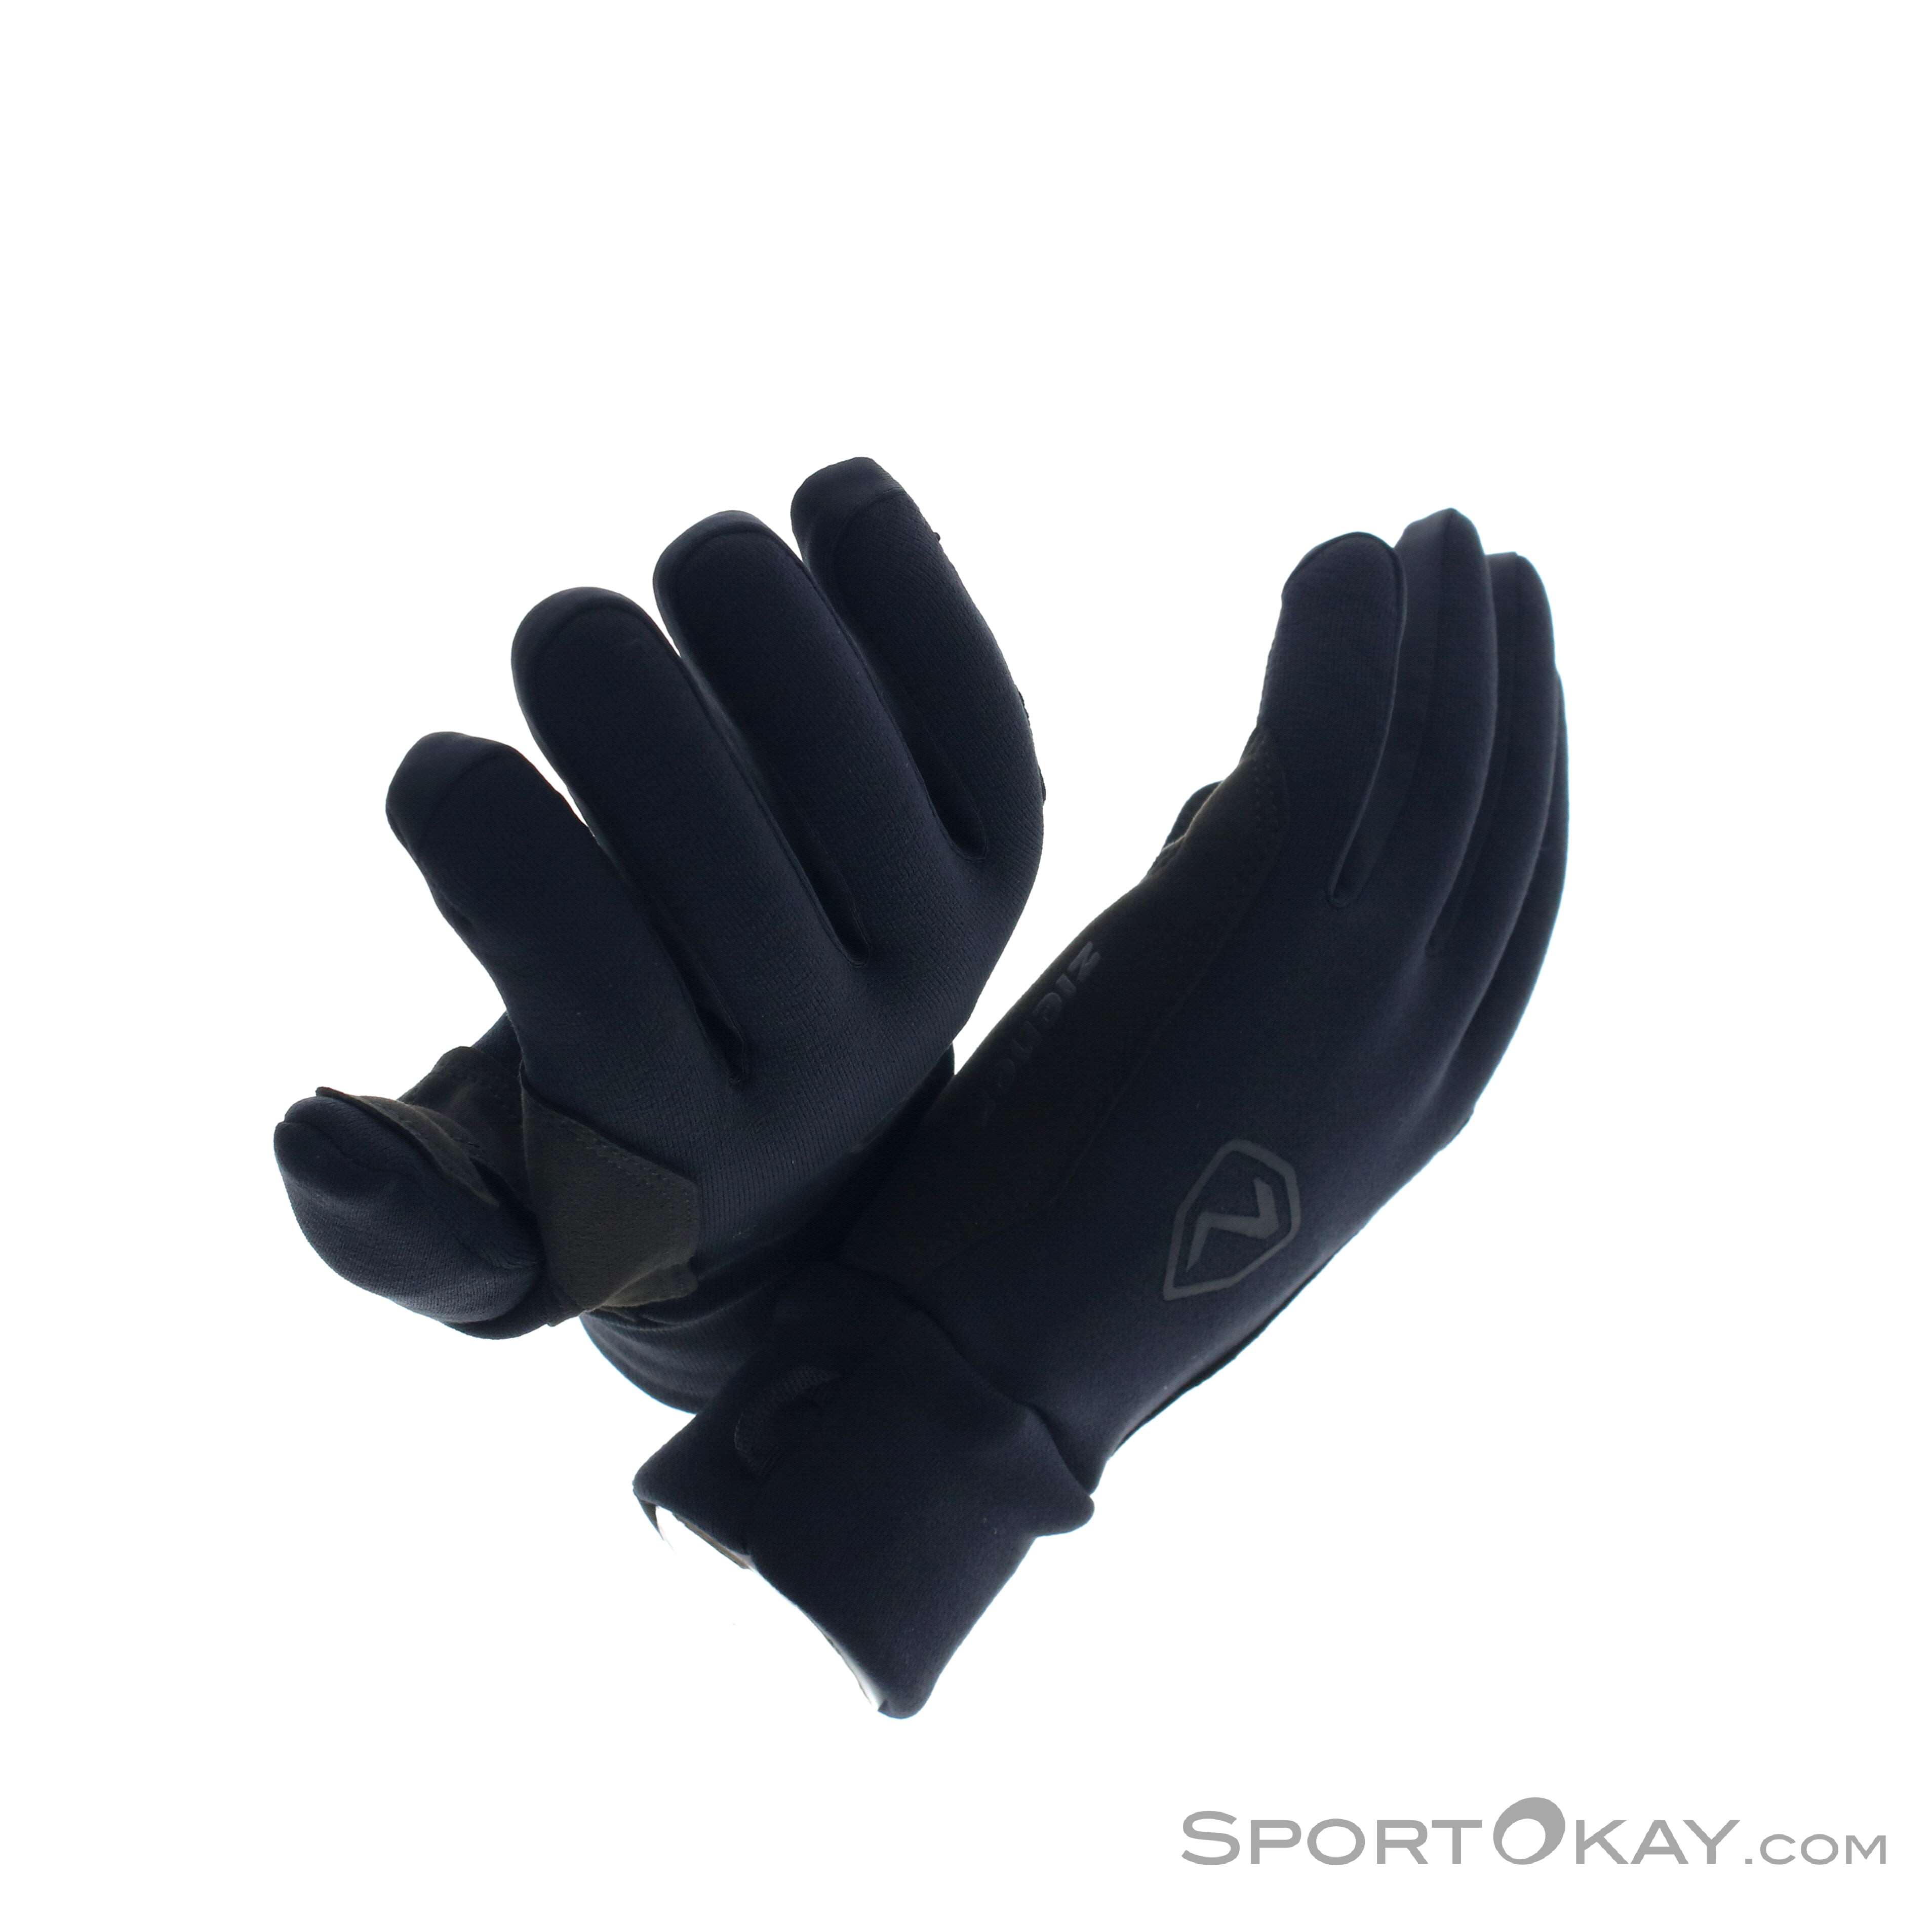 Ziener Gusty - - Outdoor - Outdoor - Clothing All Touch Gloves Gloves